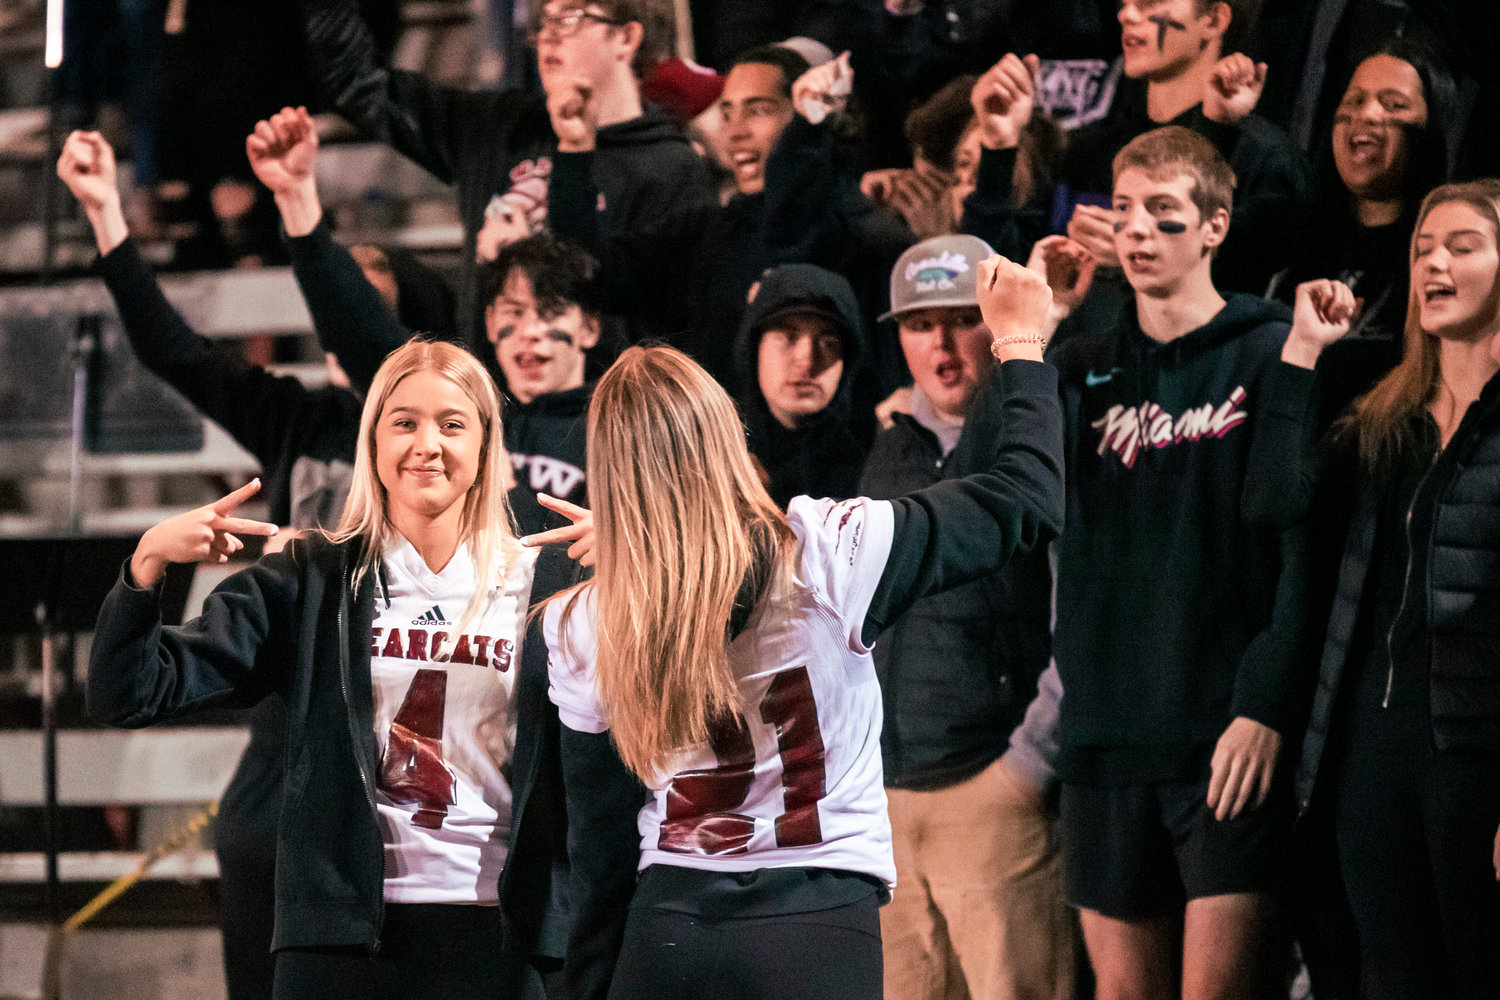 Bearcat fans sport black out attire during a Friday night game in Chehalis.